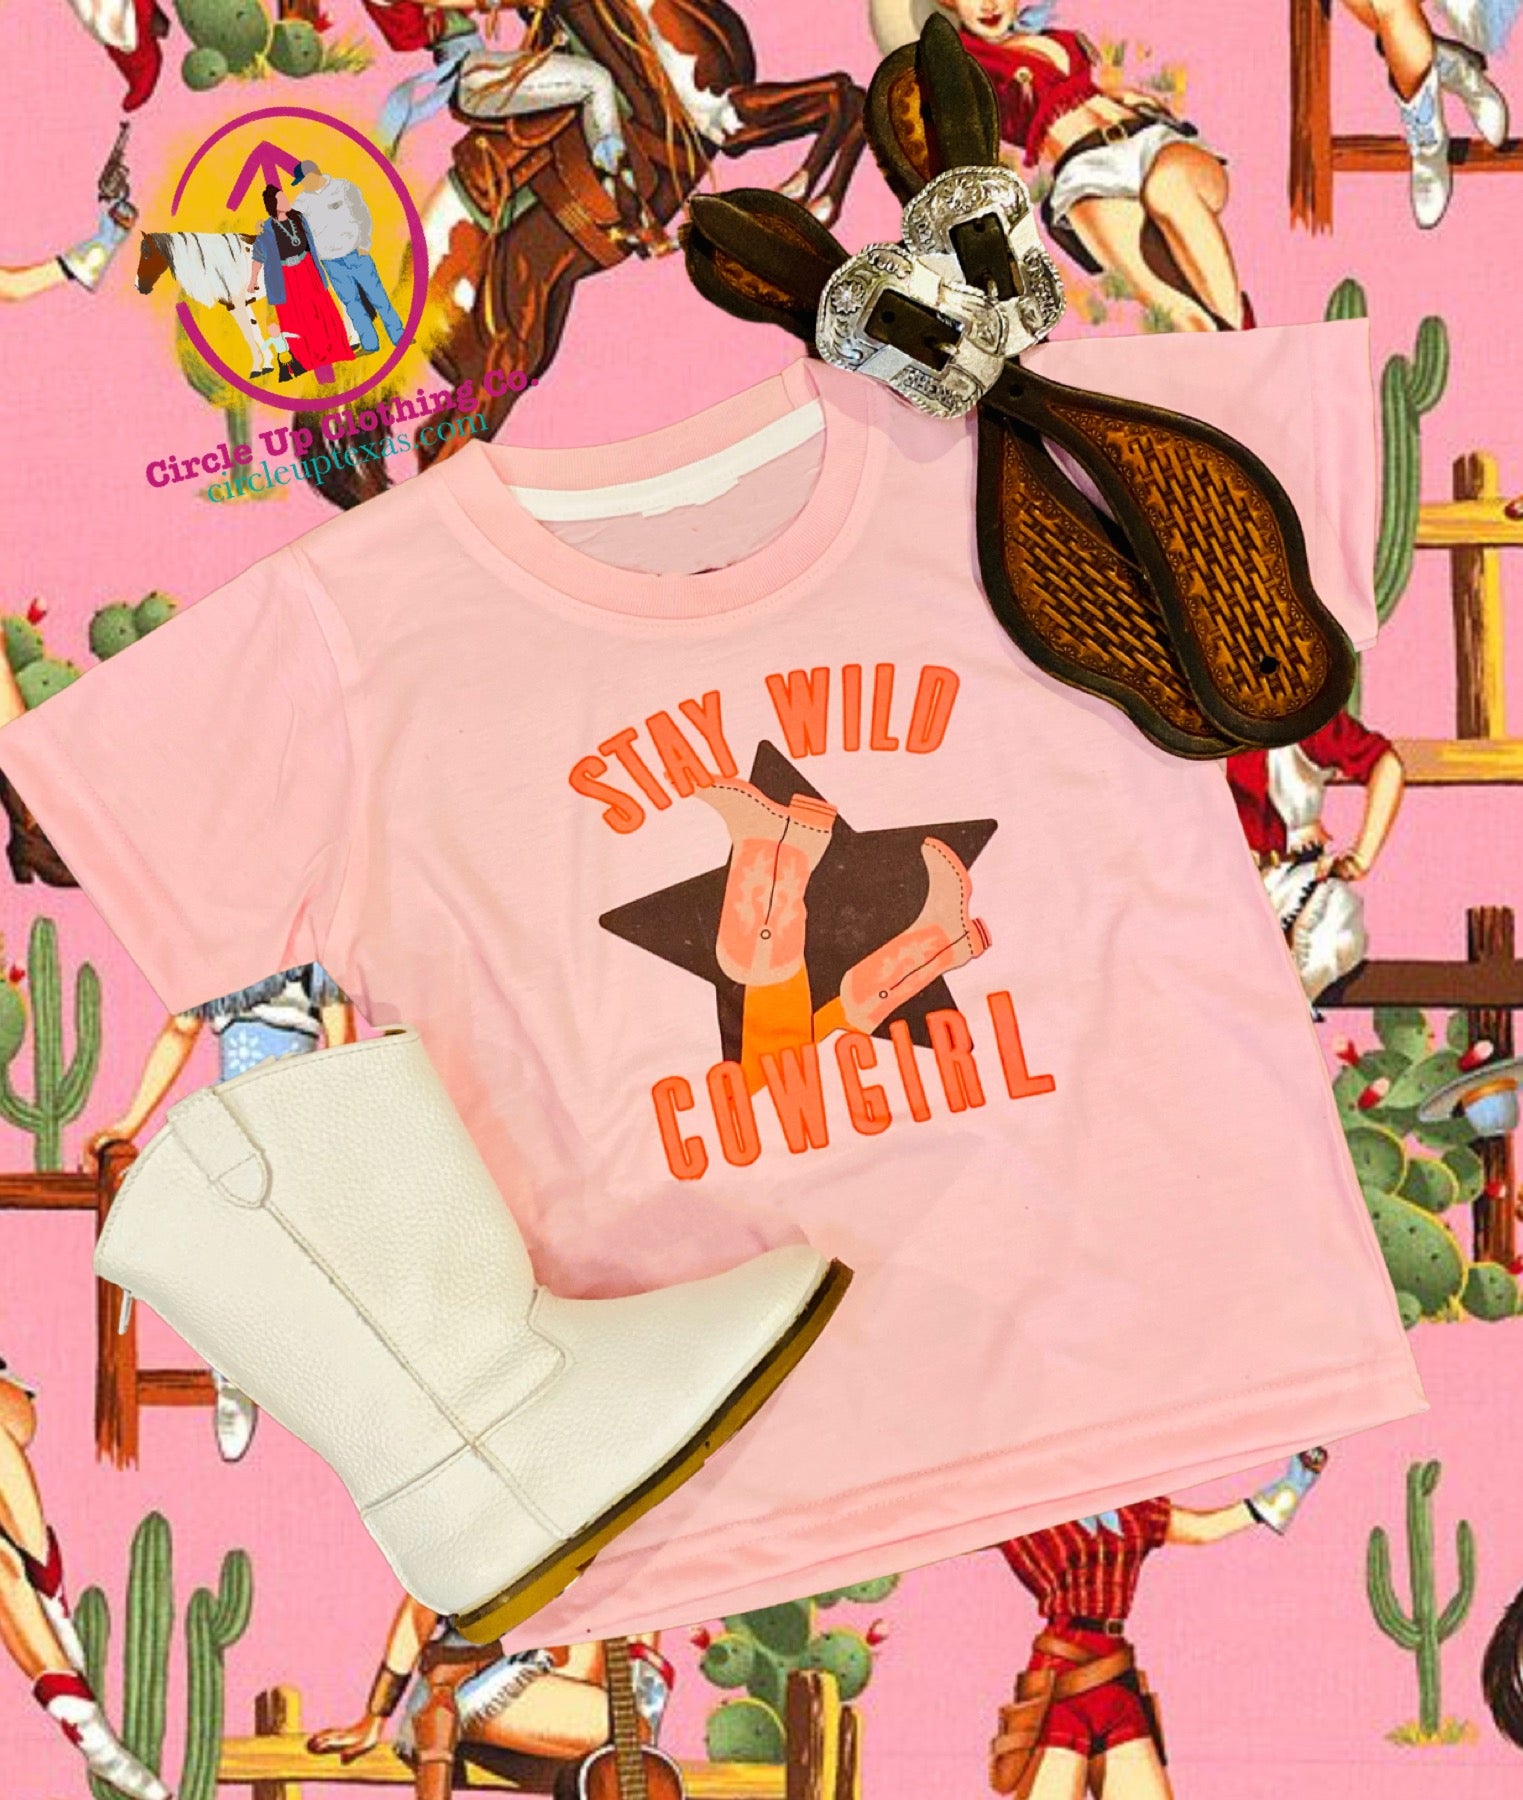 Stay Wild Cowgirl On Pink Tee